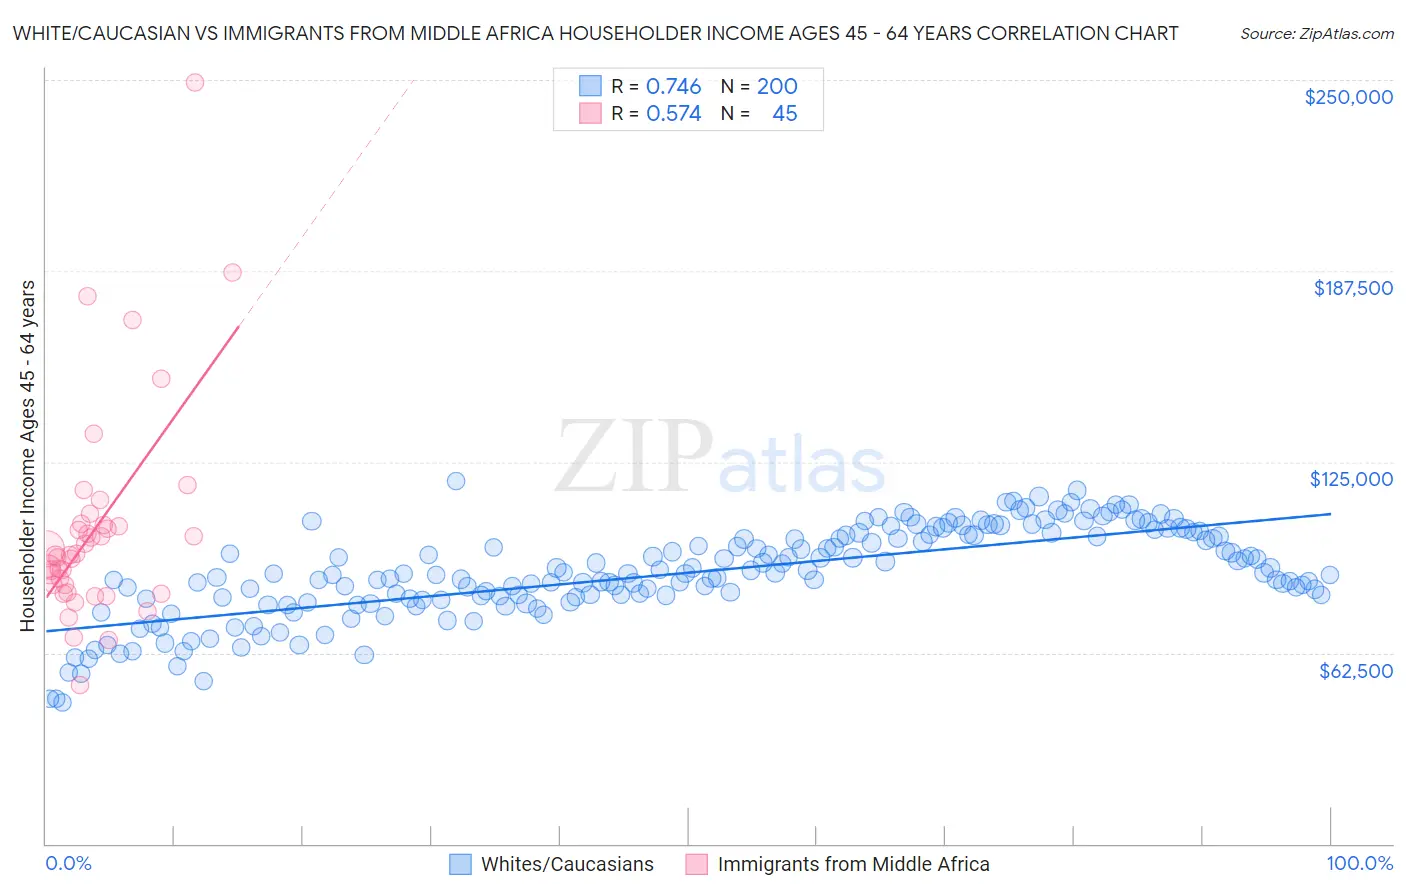 White/Caucasian vs Immigrants from Middle Africa Householder Income Ages 45 - 64 years